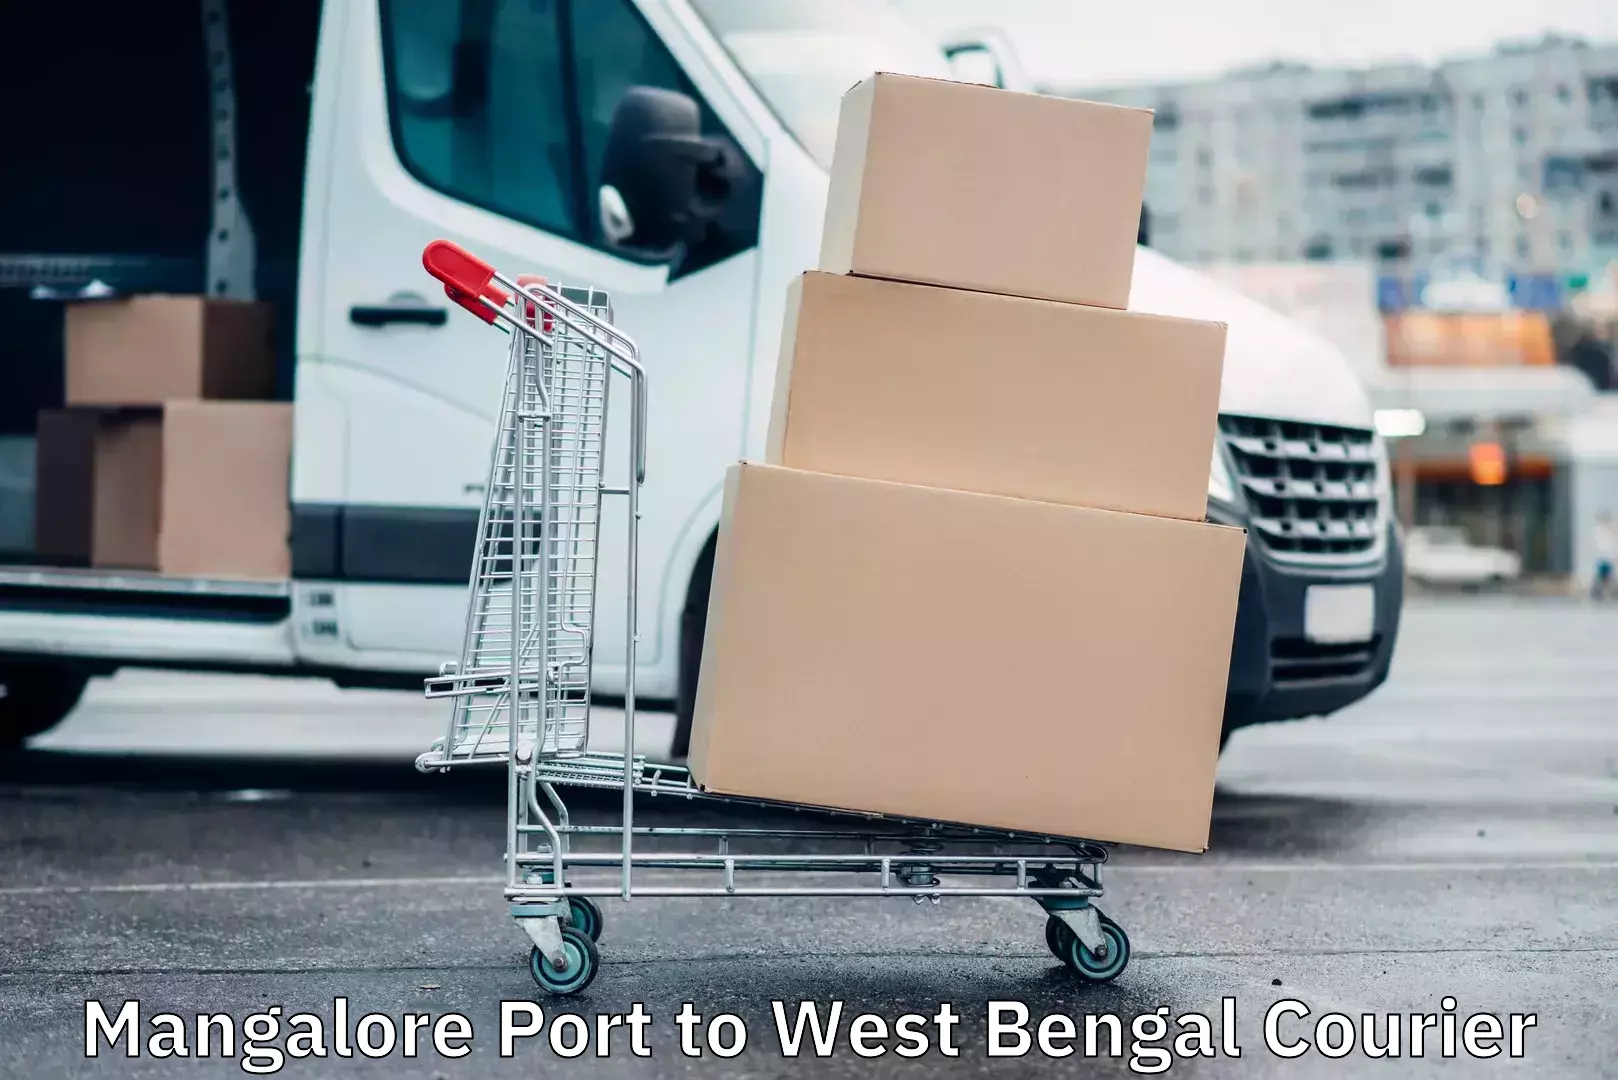 Cargo delivery service Mangalore Port to Morgram